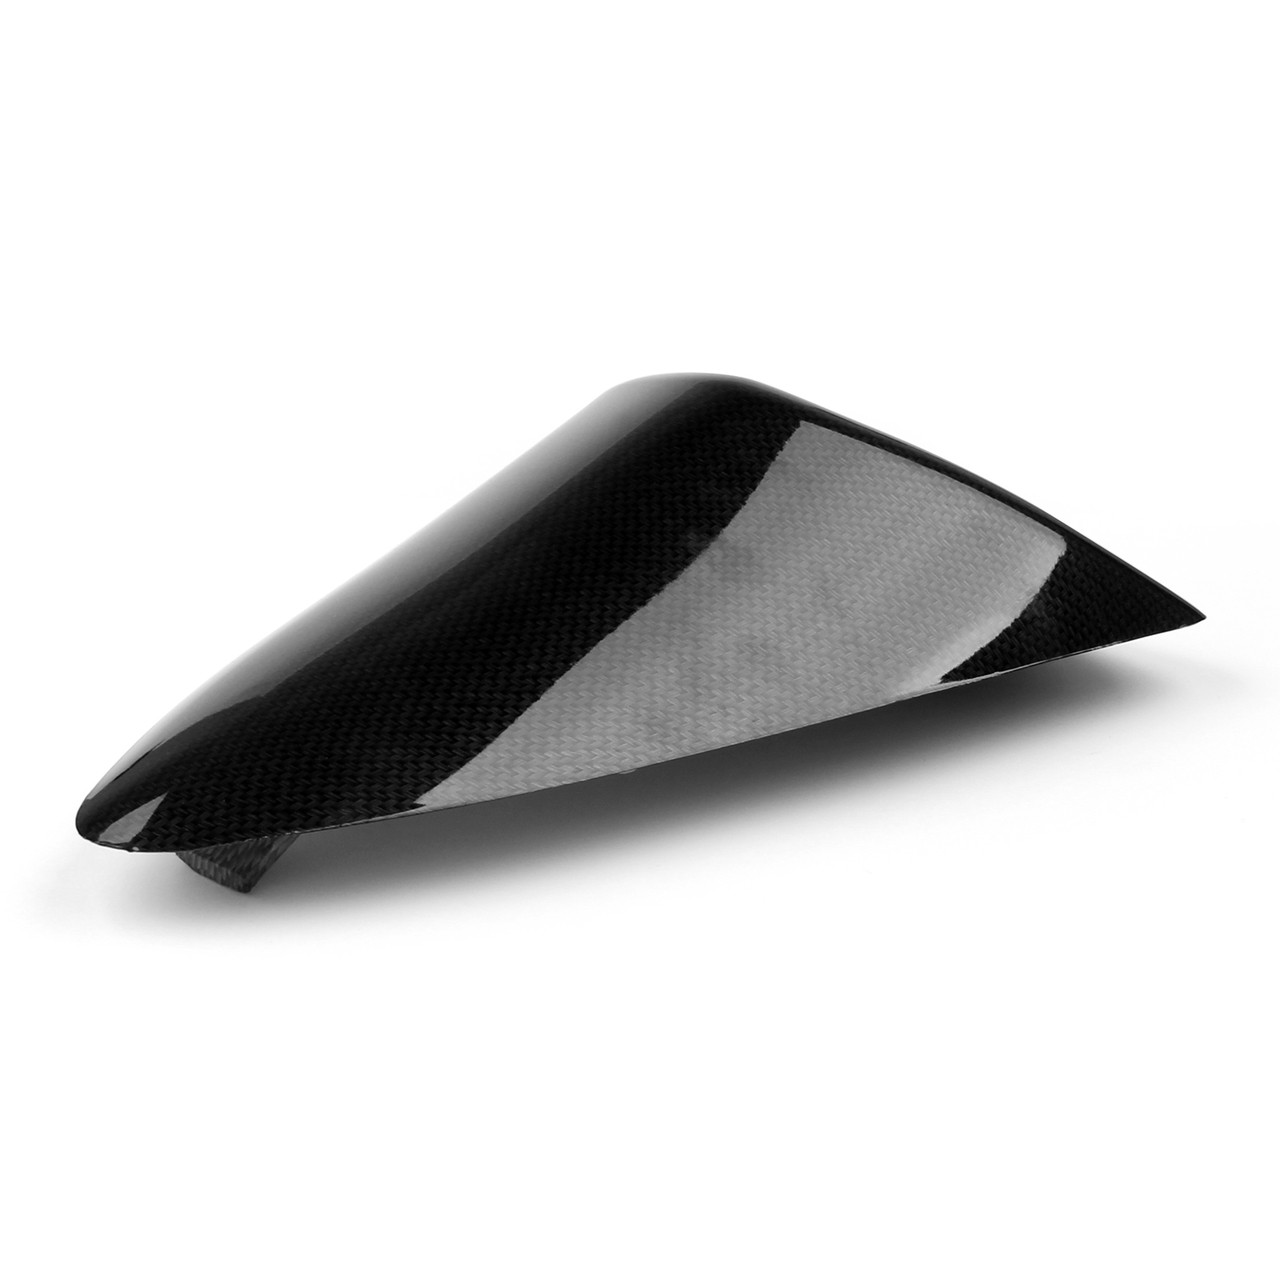 Seat Cowl Rear Cover for Kawasaki ZX6R 636 (2007-2008) Carbon